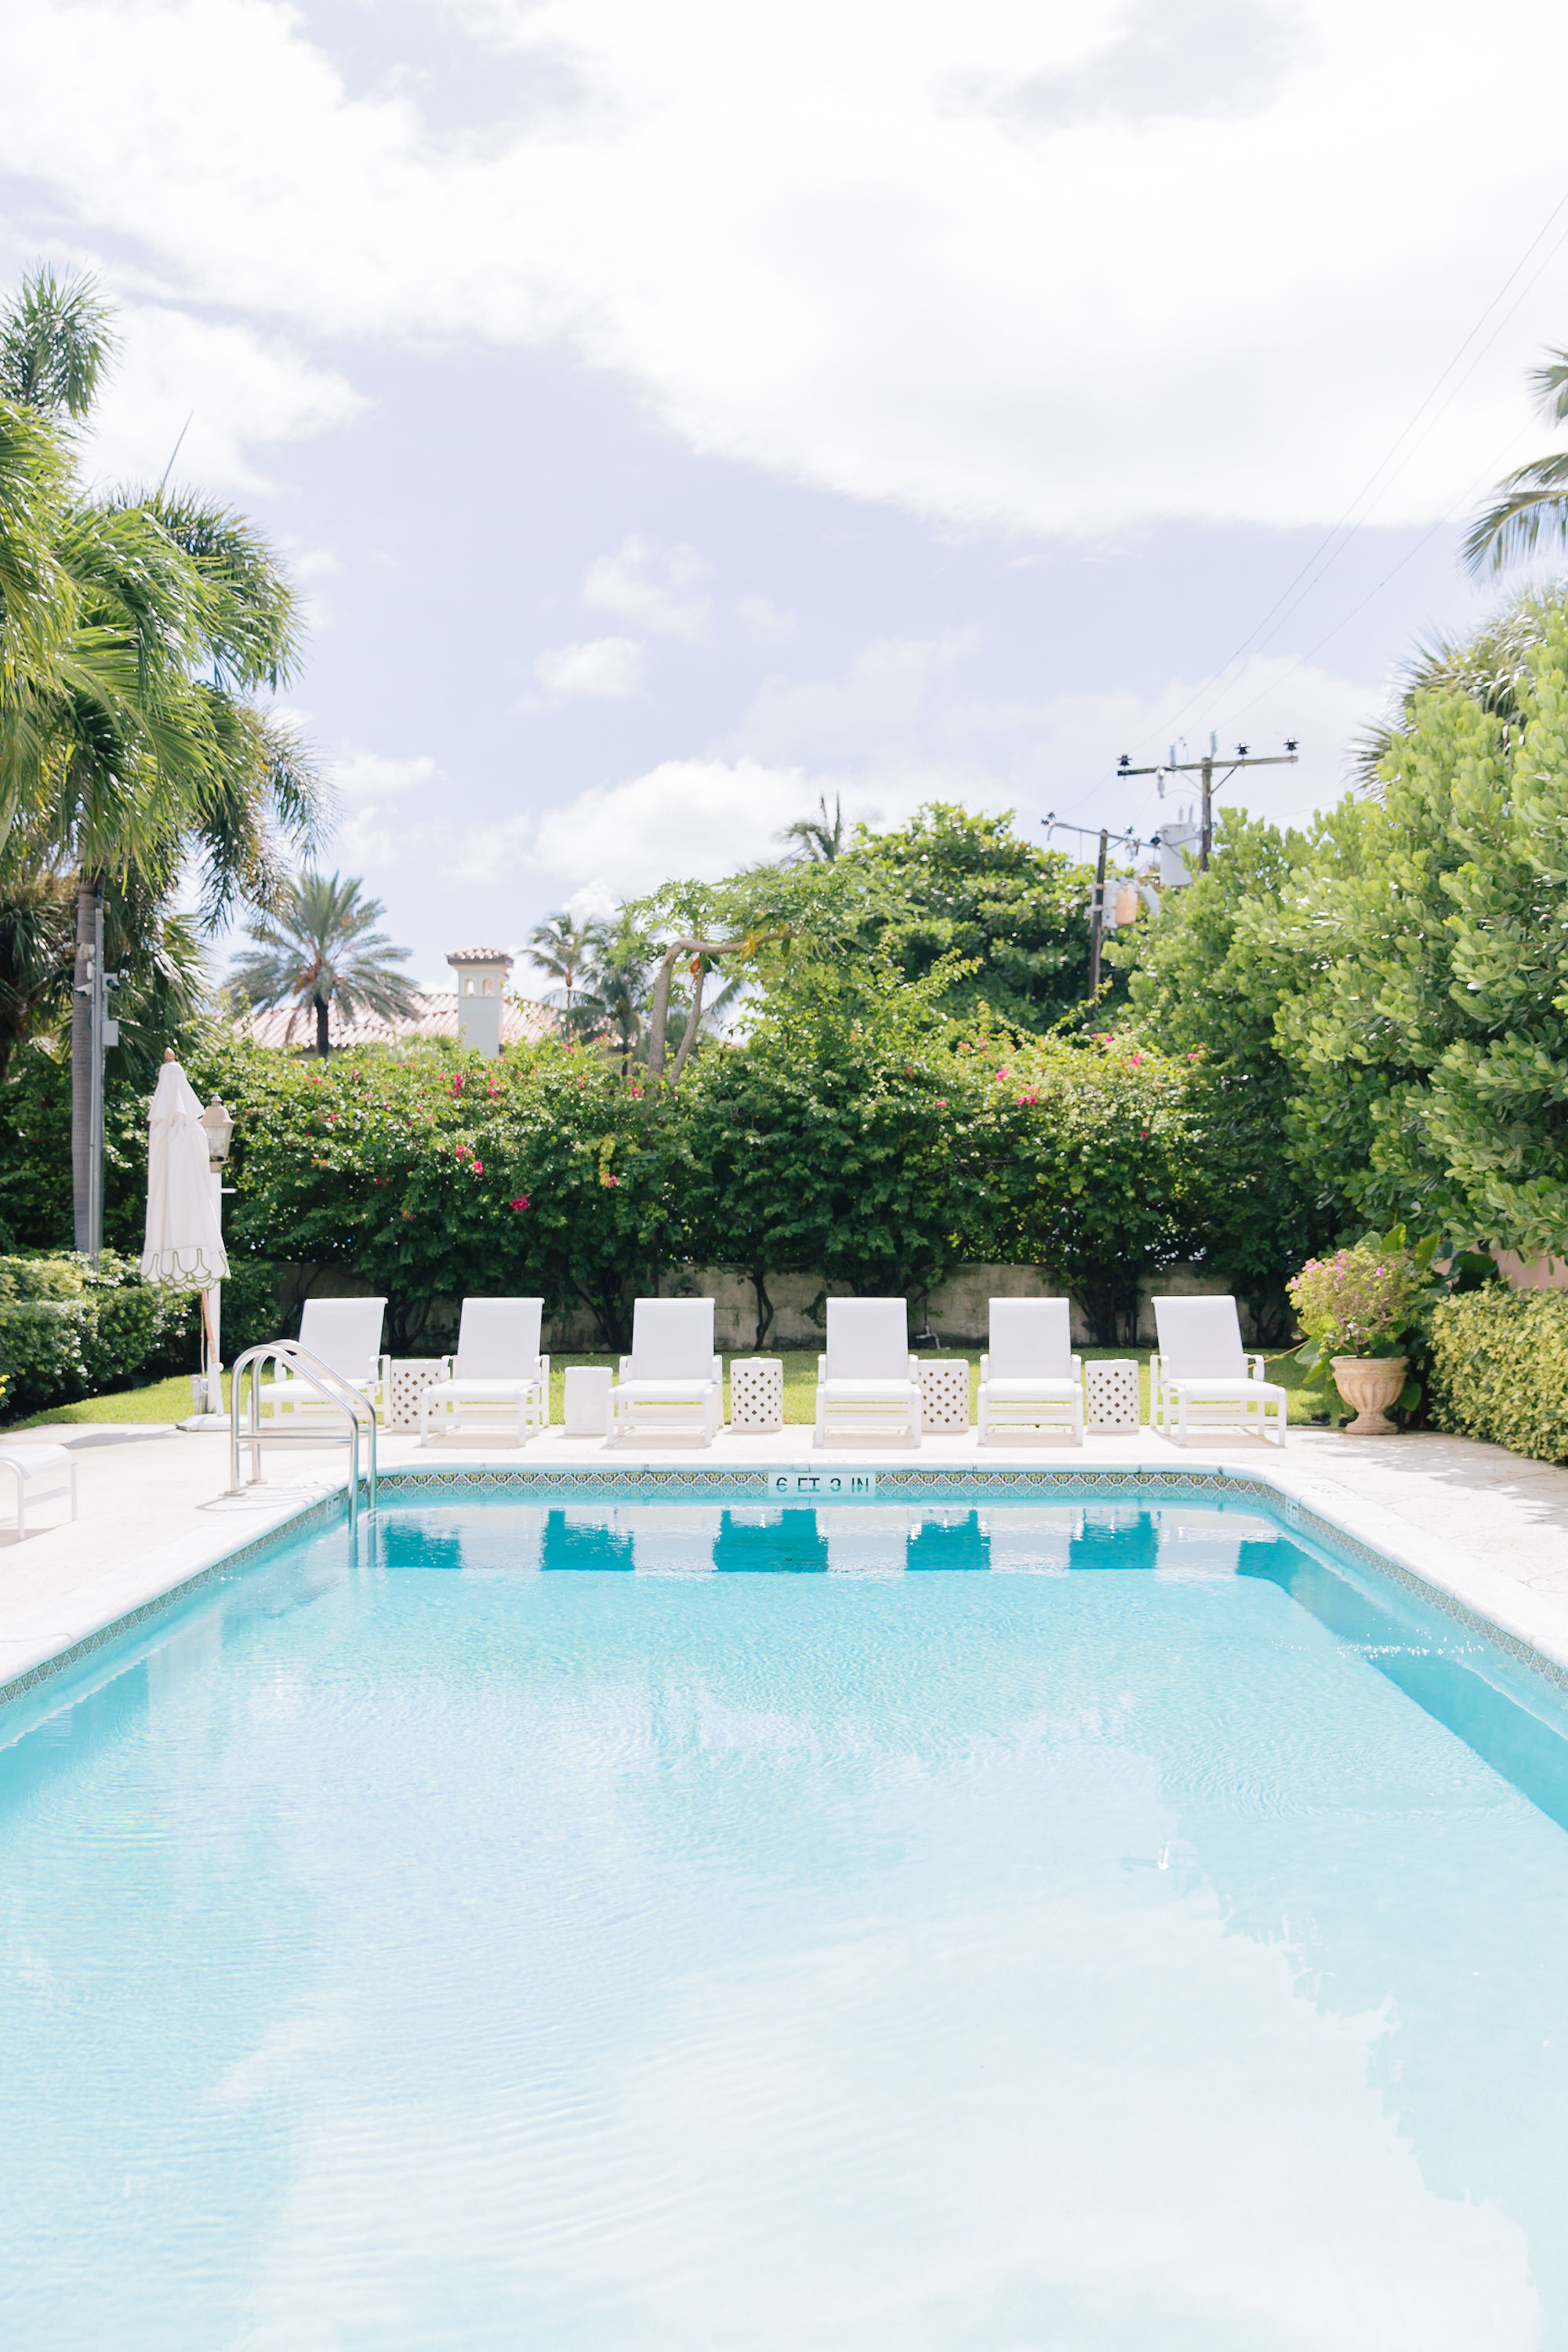 Travel: Staycation at The Colony Palm Beach with Palm Beach Lately